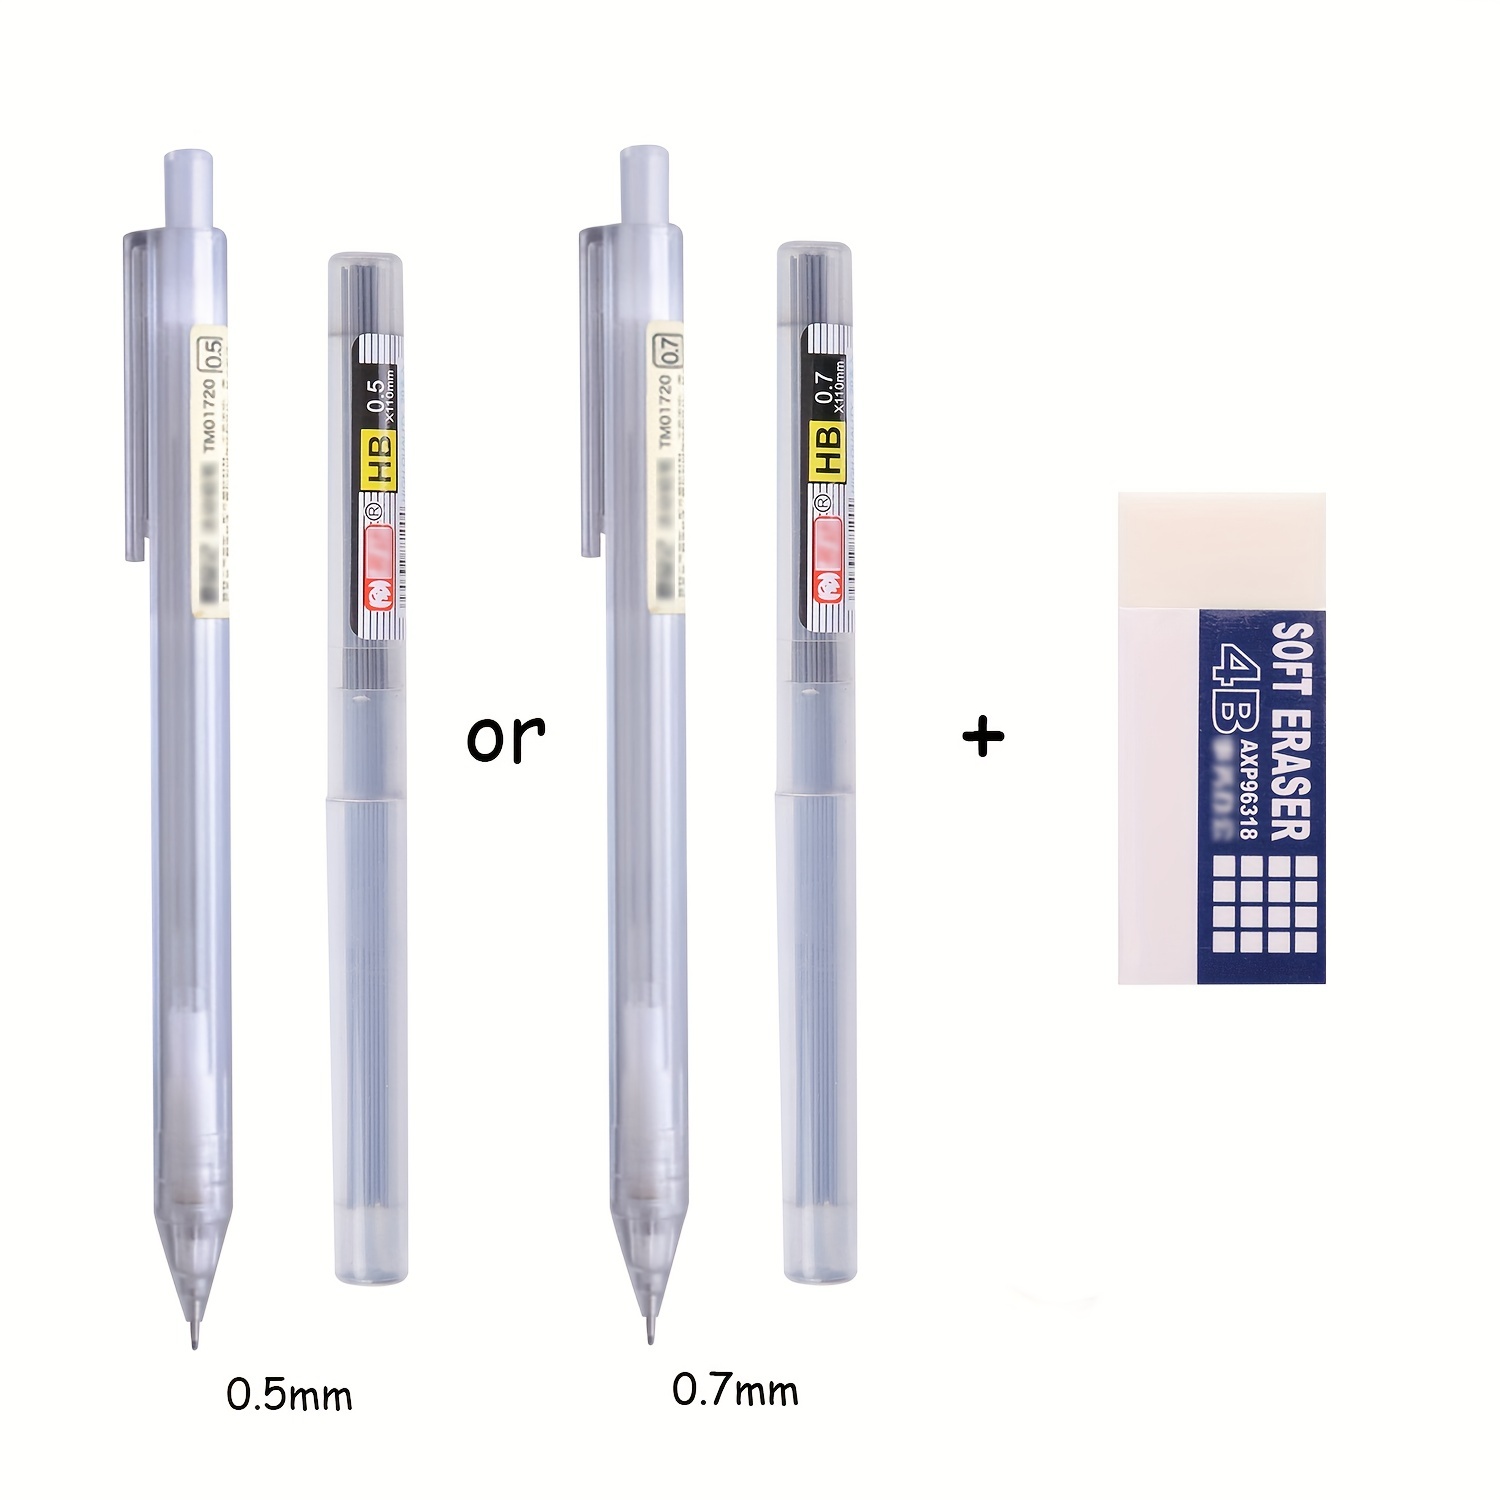 11pcs High Quality Mechanical Pencil Set, 3pcs White 0.5mm Mechanical  Pencils, 72pcs 0.5mm Refills, 2pcs Erasers, Suitable For Writing And Drawing